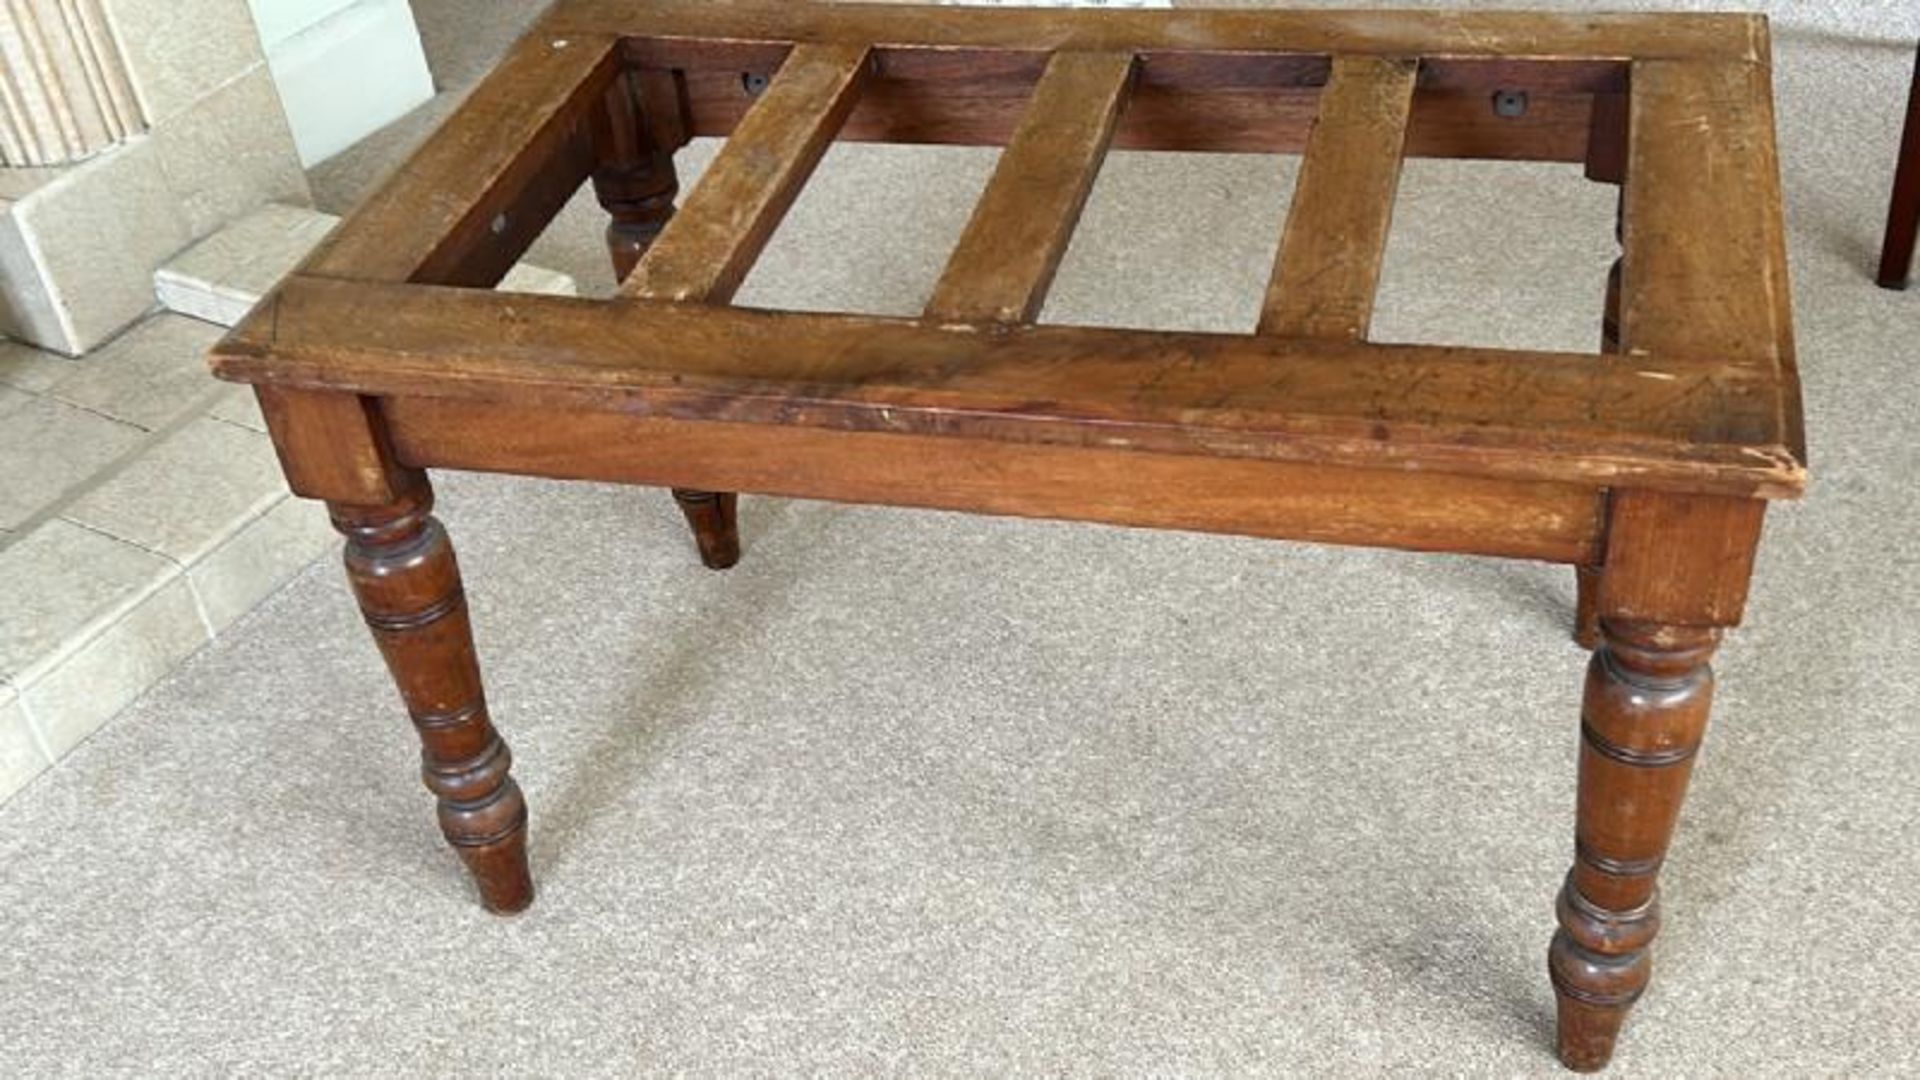 Small pine table frame, 76 x 45 x 45cm (collection from private residence in Weybridge, Surrey) - Image 2 of 3